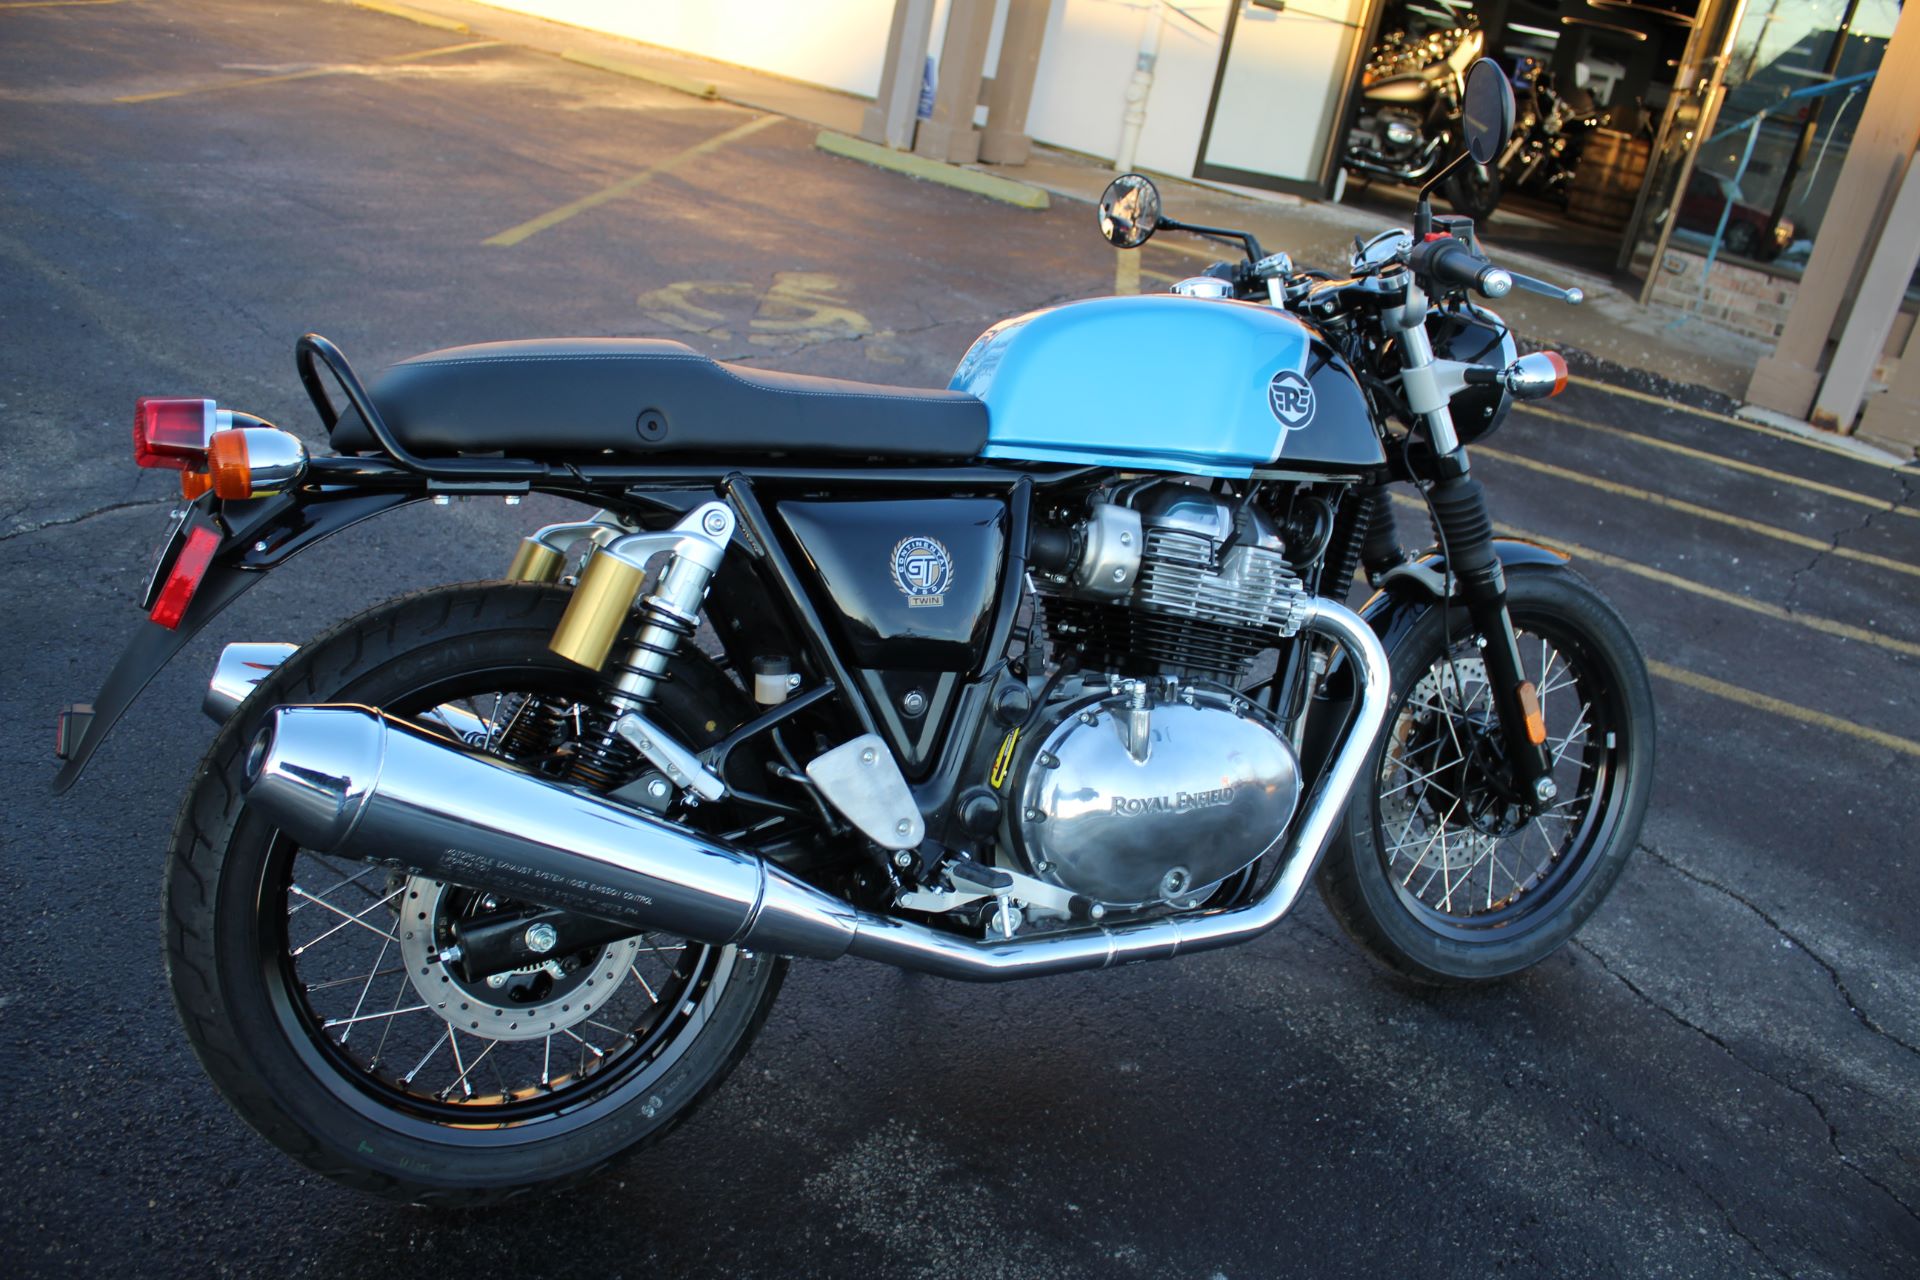 2022 Royal Enfield Continental GT 650 in West Allis, Wisconsin - Photo 6